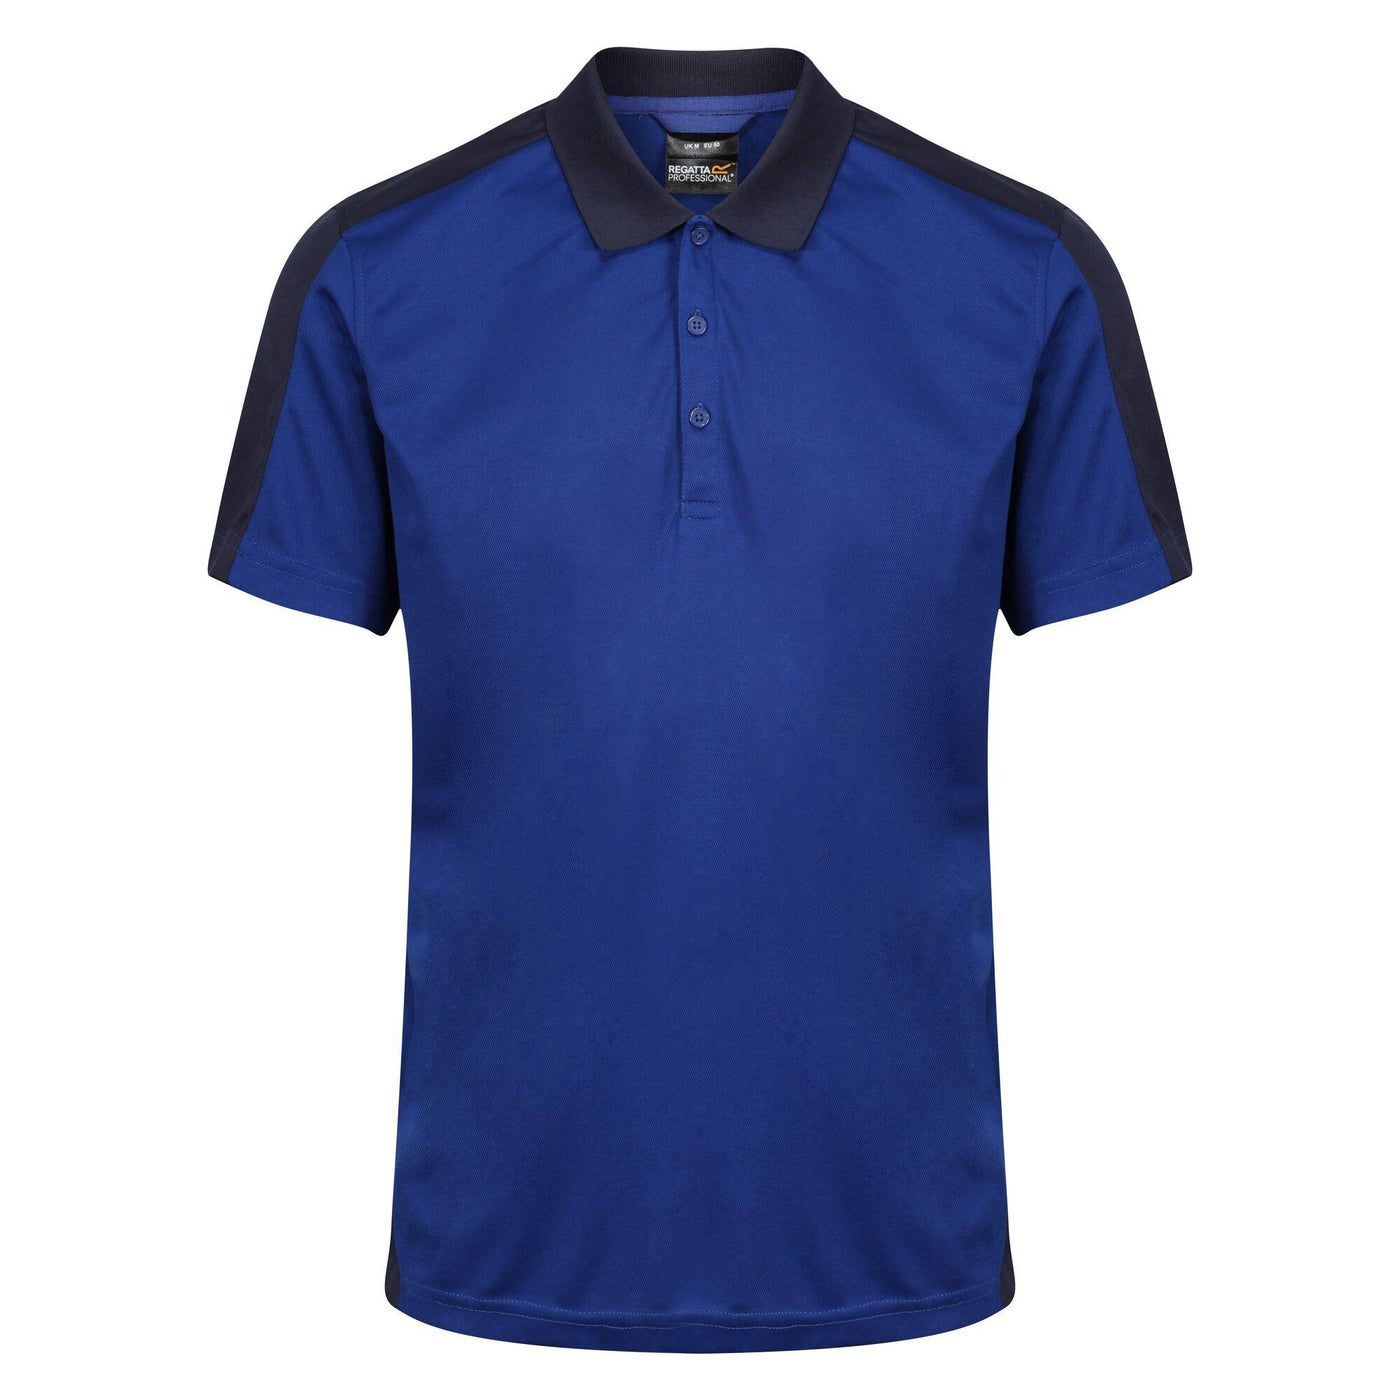 Regatta Professional Mens Contrast Coolweave Quick Wicking Polo Shirt New Royal Blue Navy 1#colour_new-royal-blue-navy